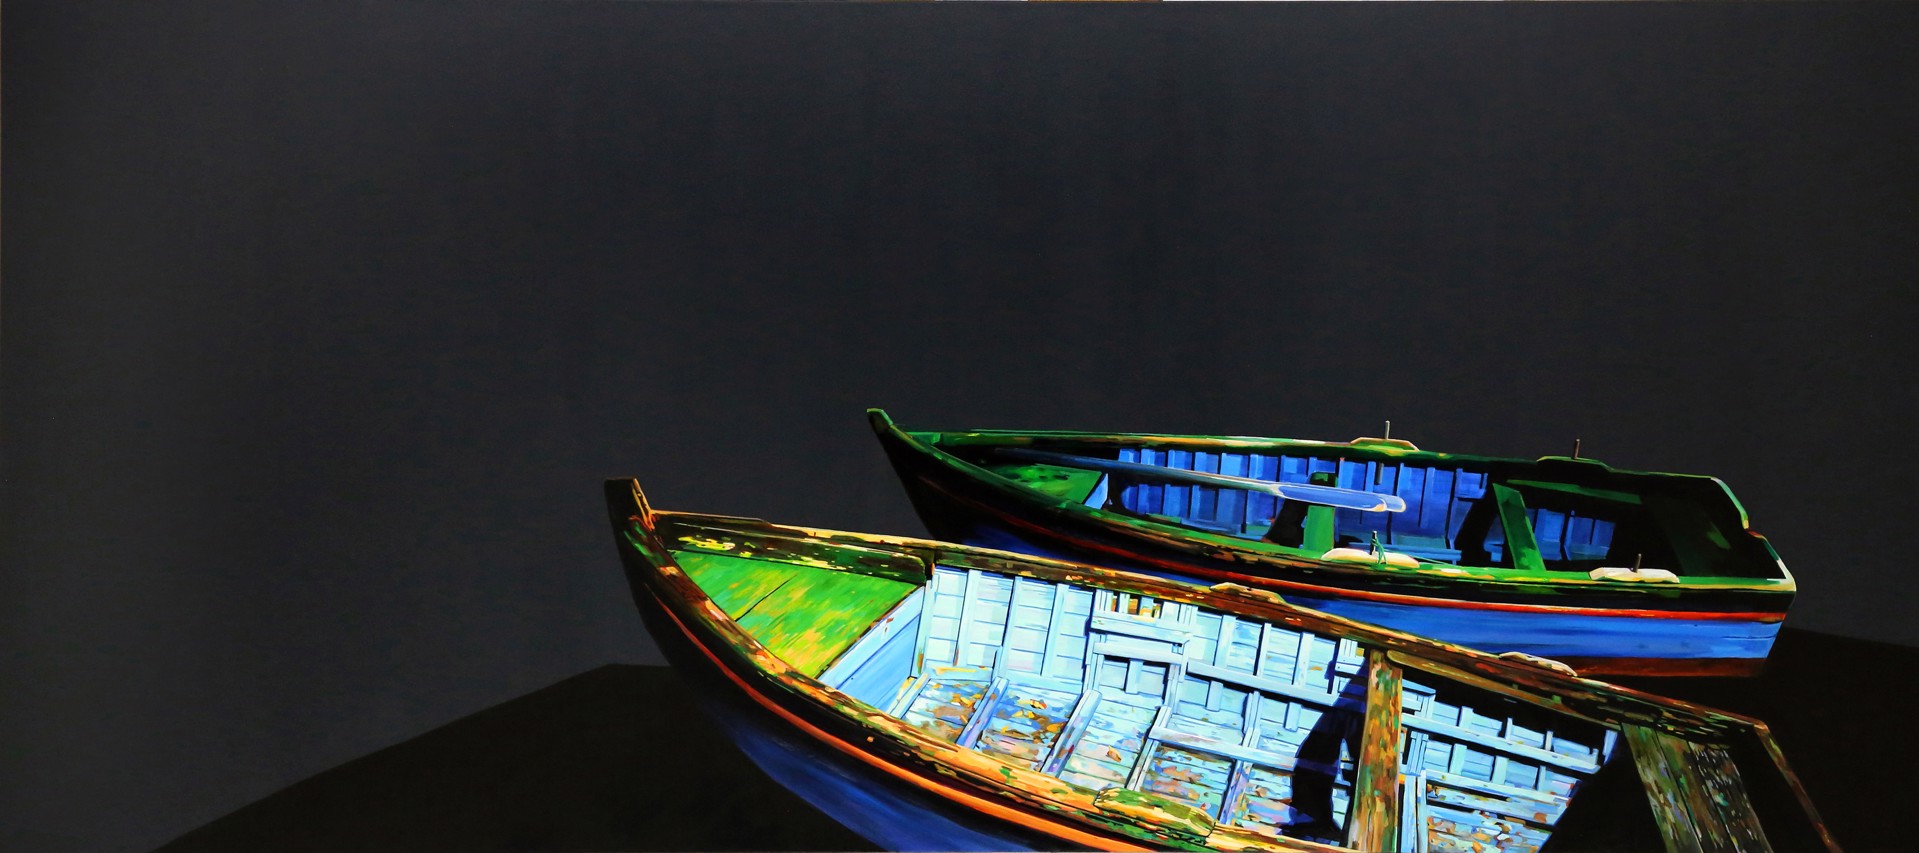 Beached Boats by Roger Hayden Johnson